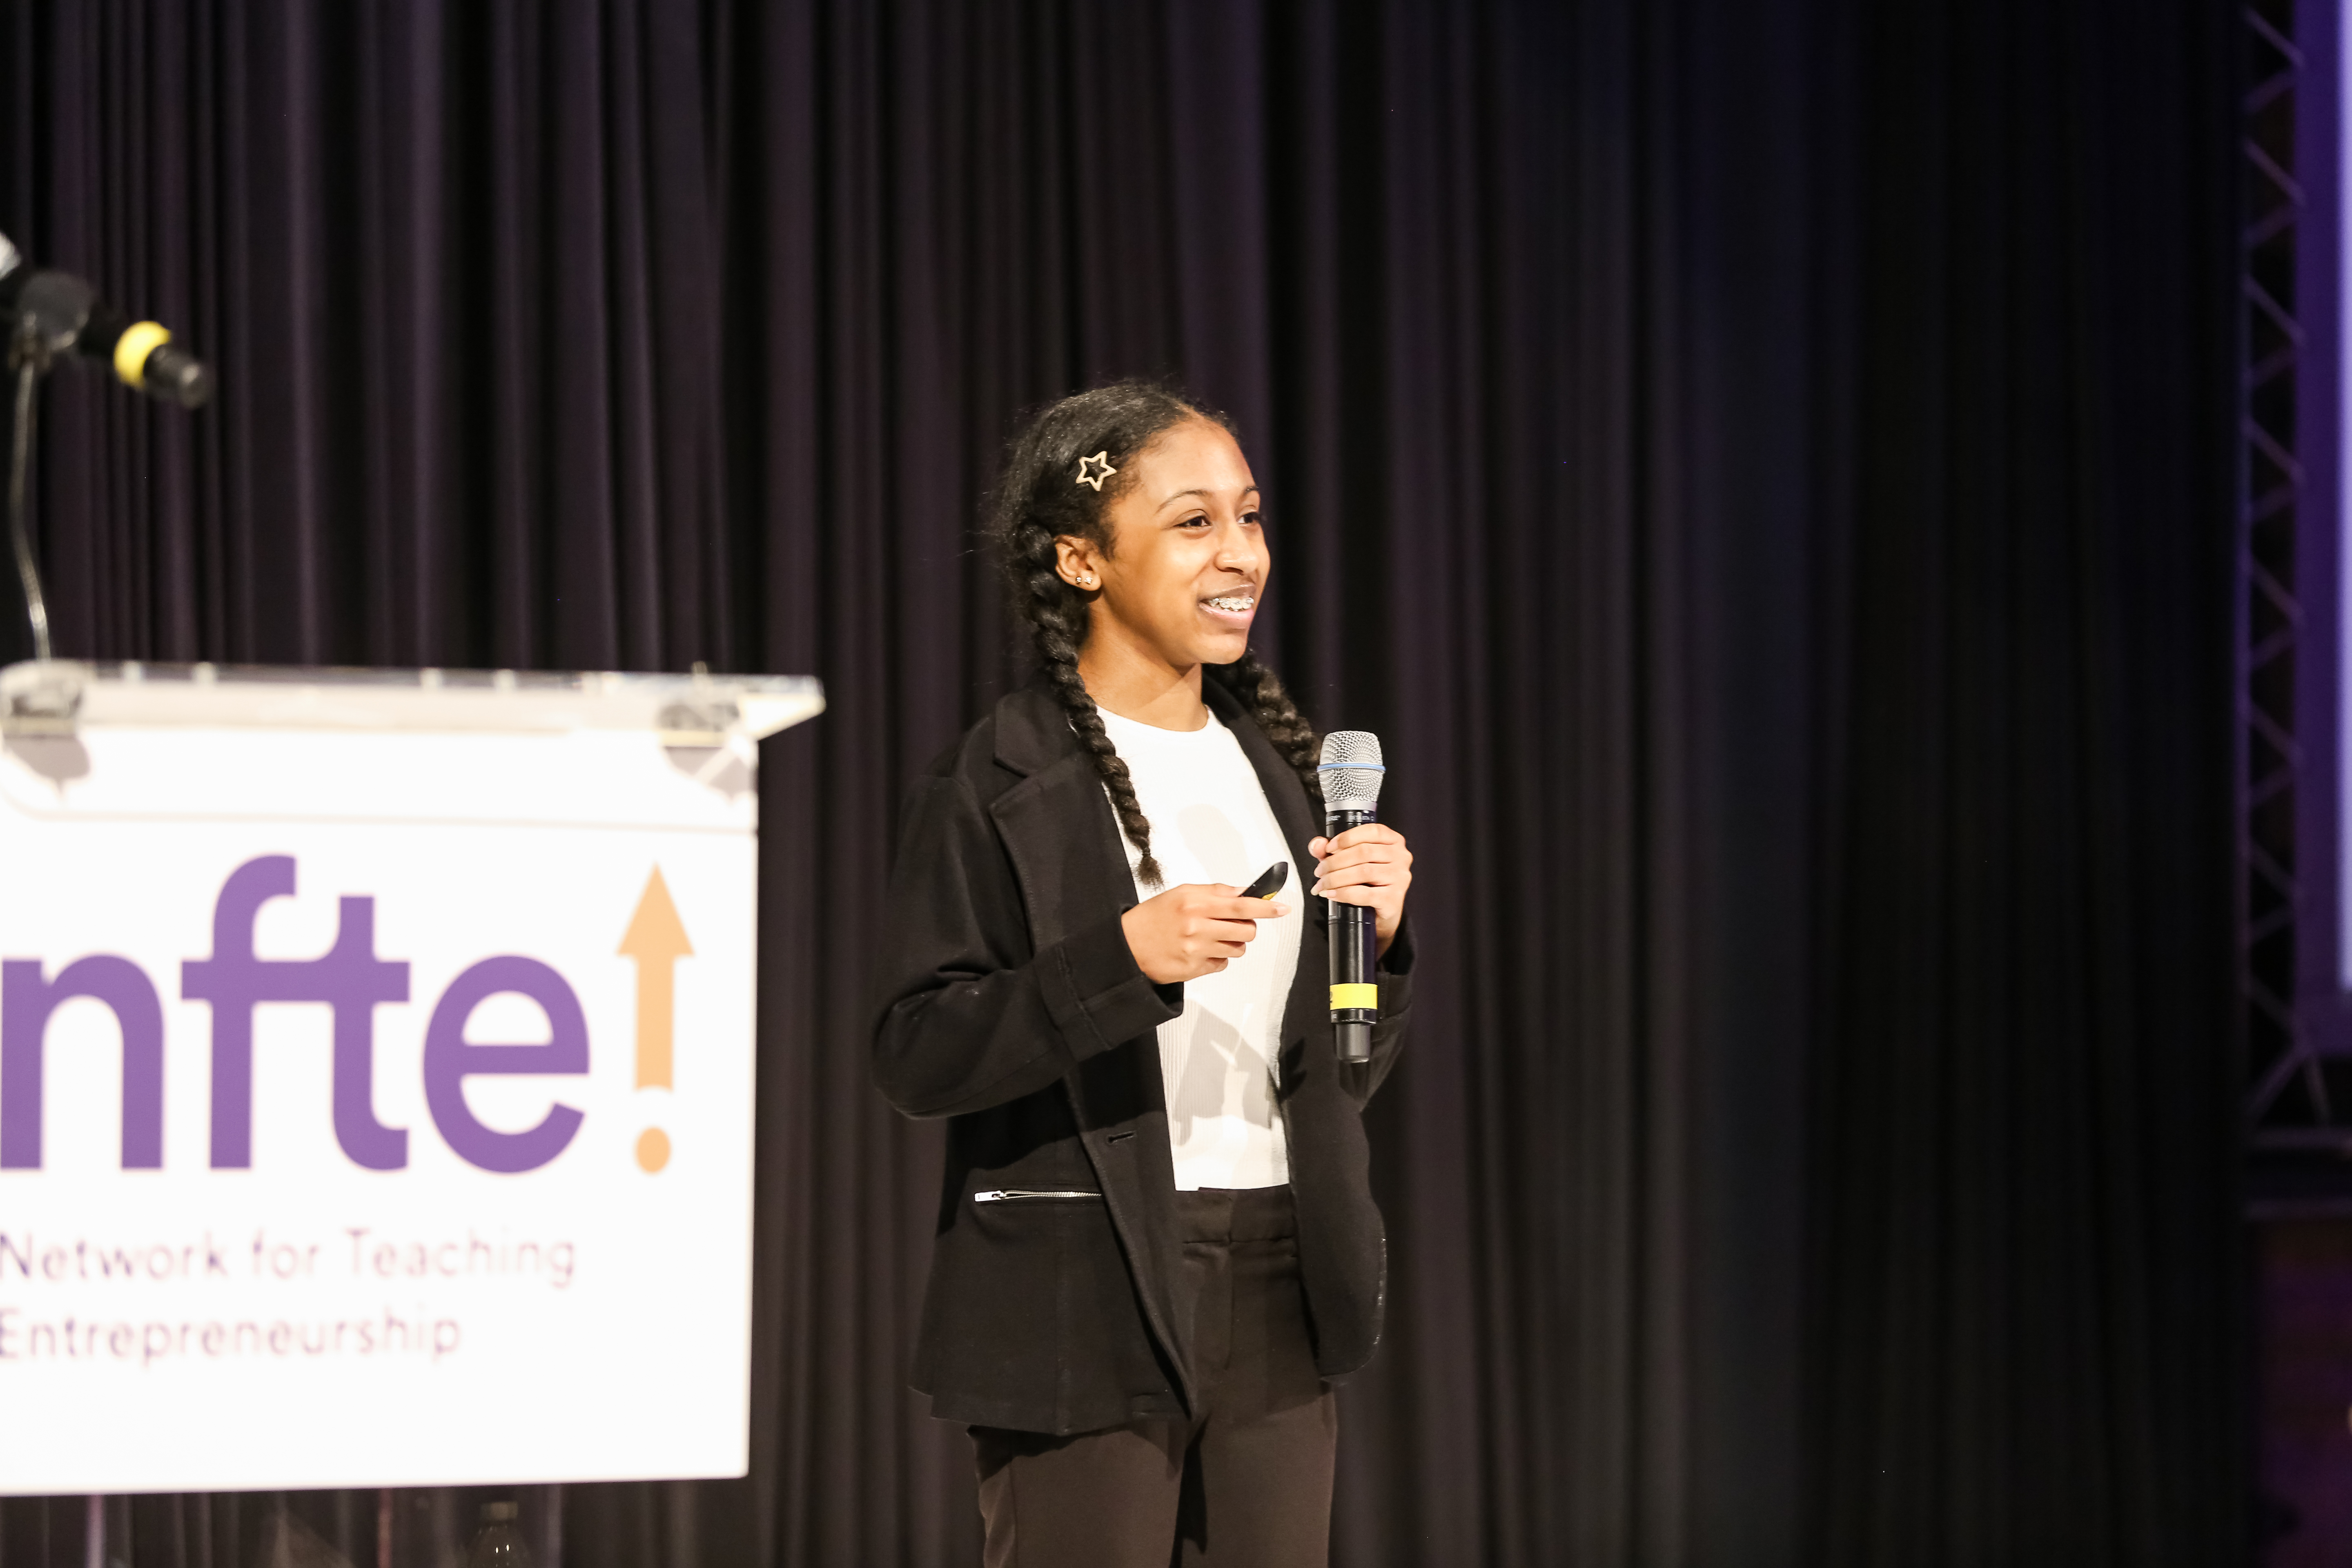 NFTE Midwest Youth Entrepreneurship Challenge Champion